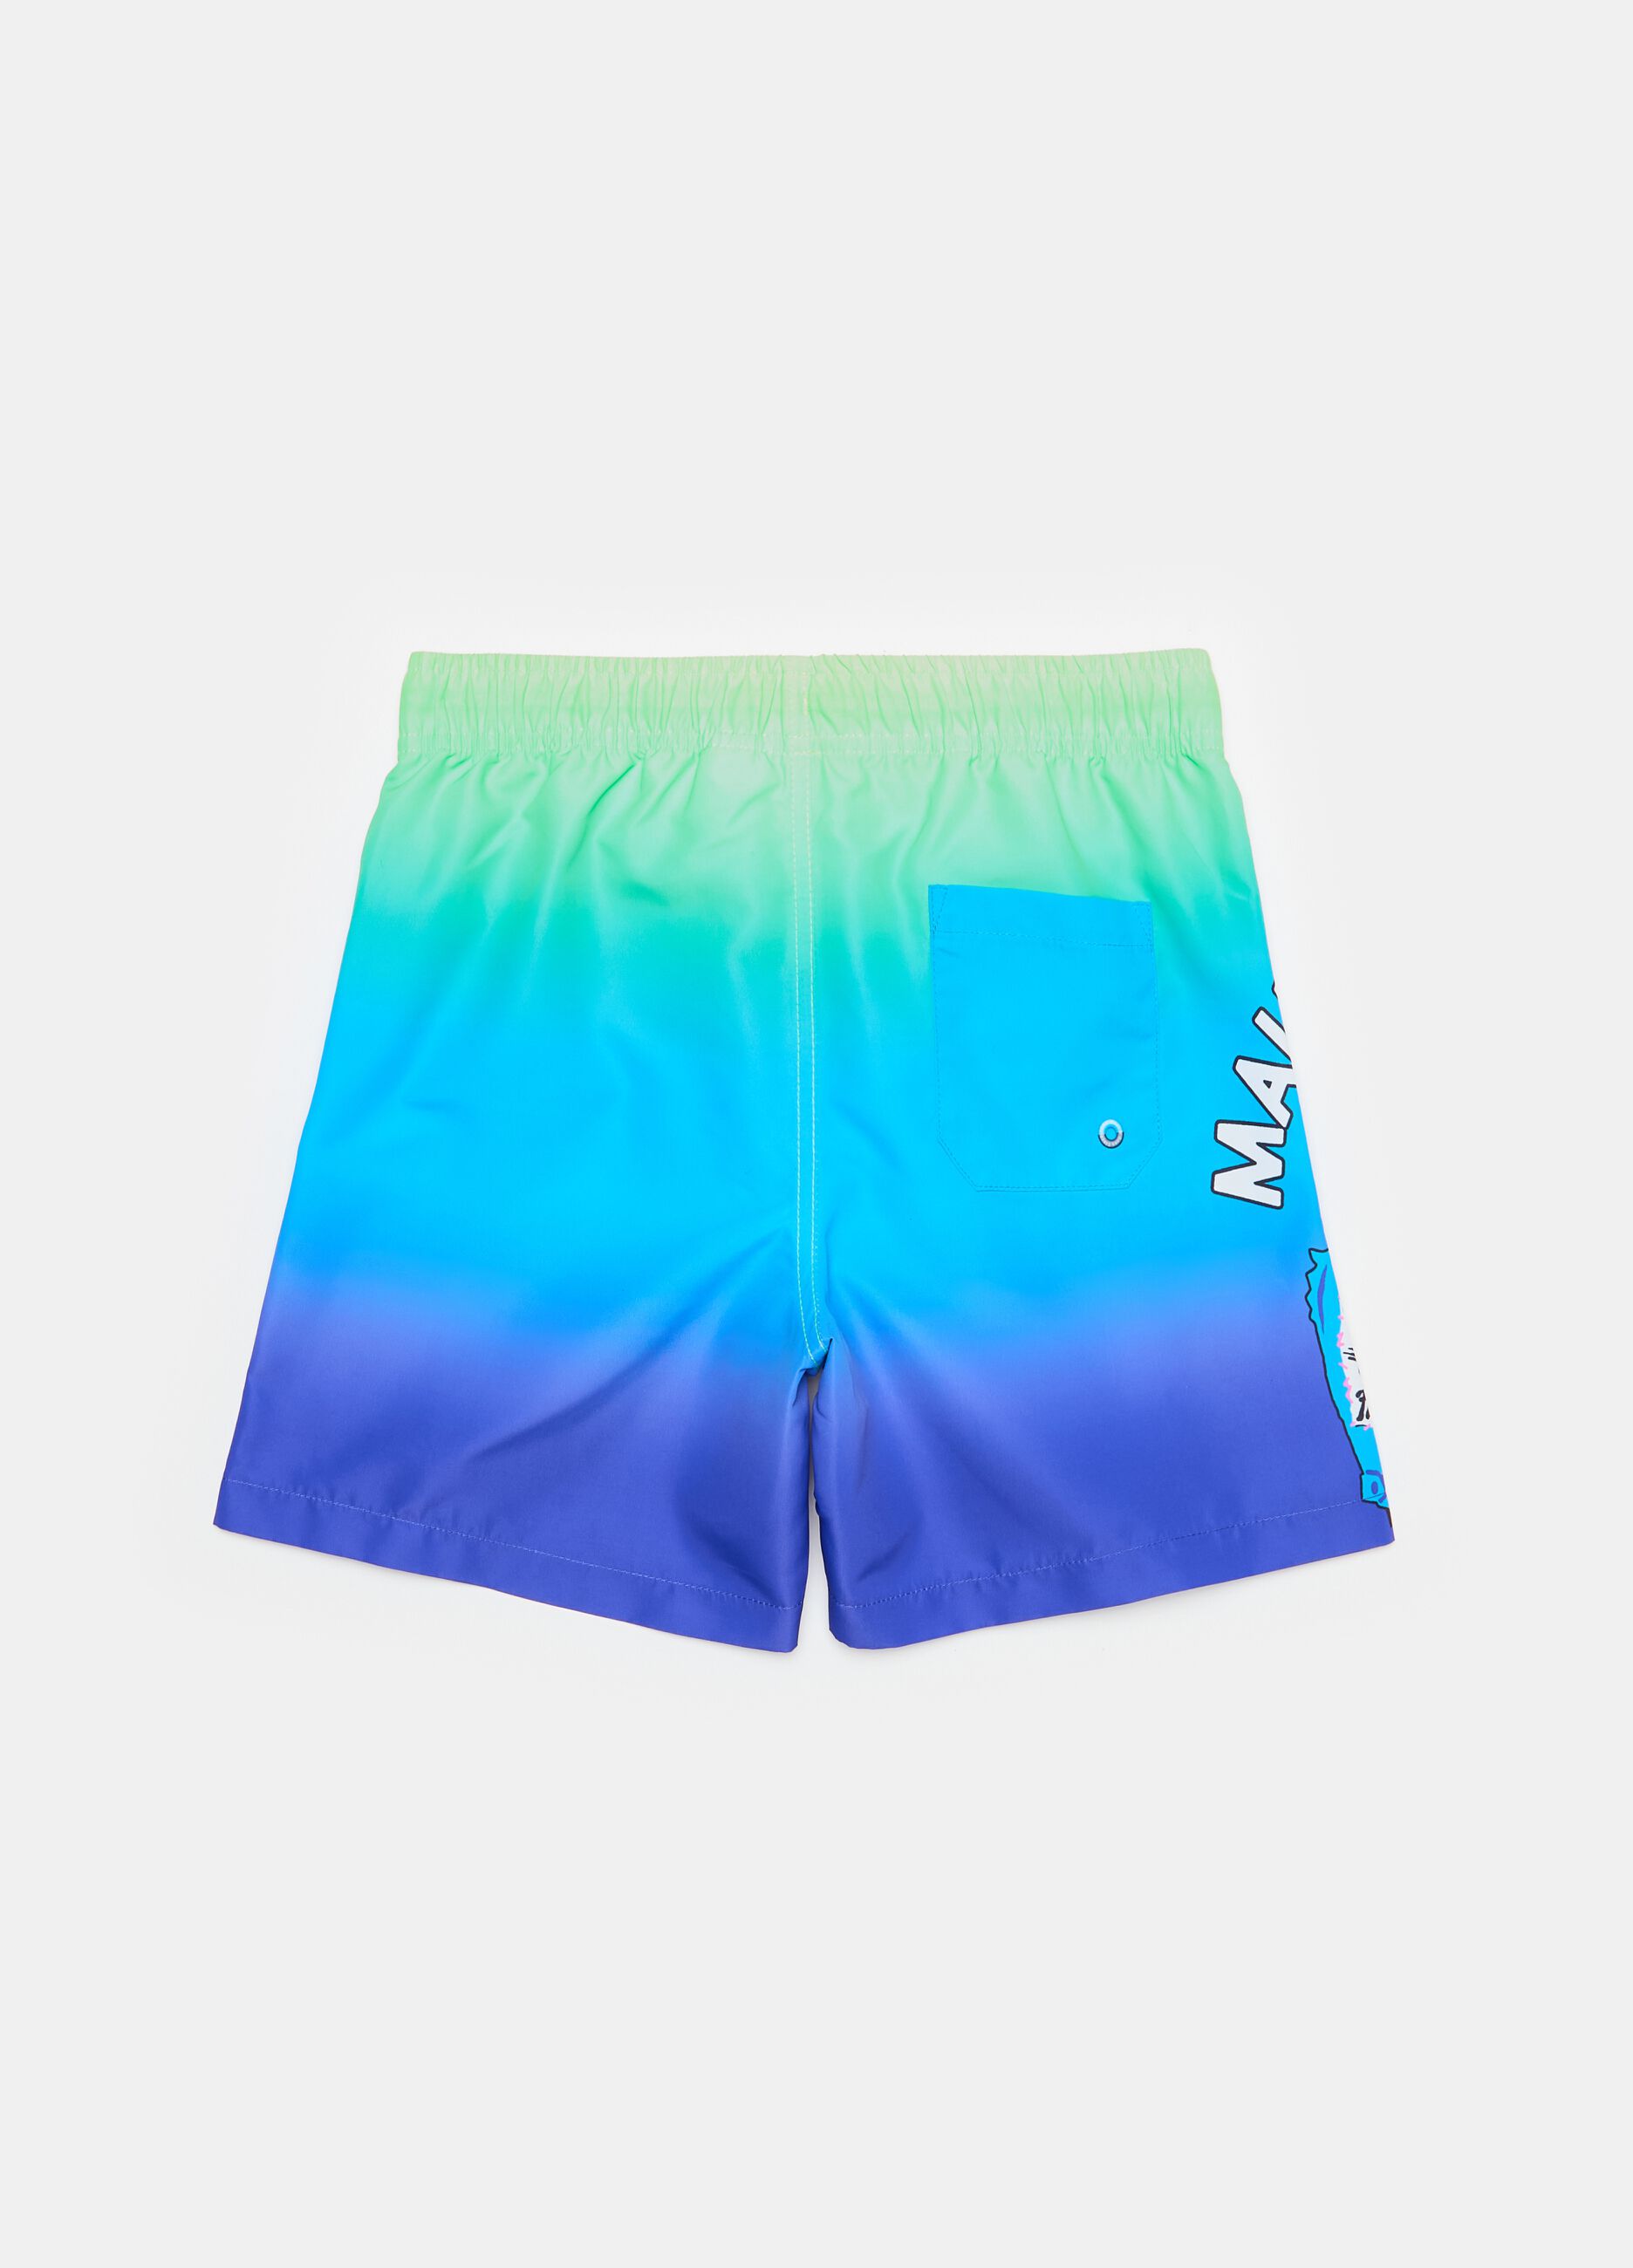 Degradé swimming trunks with surf print